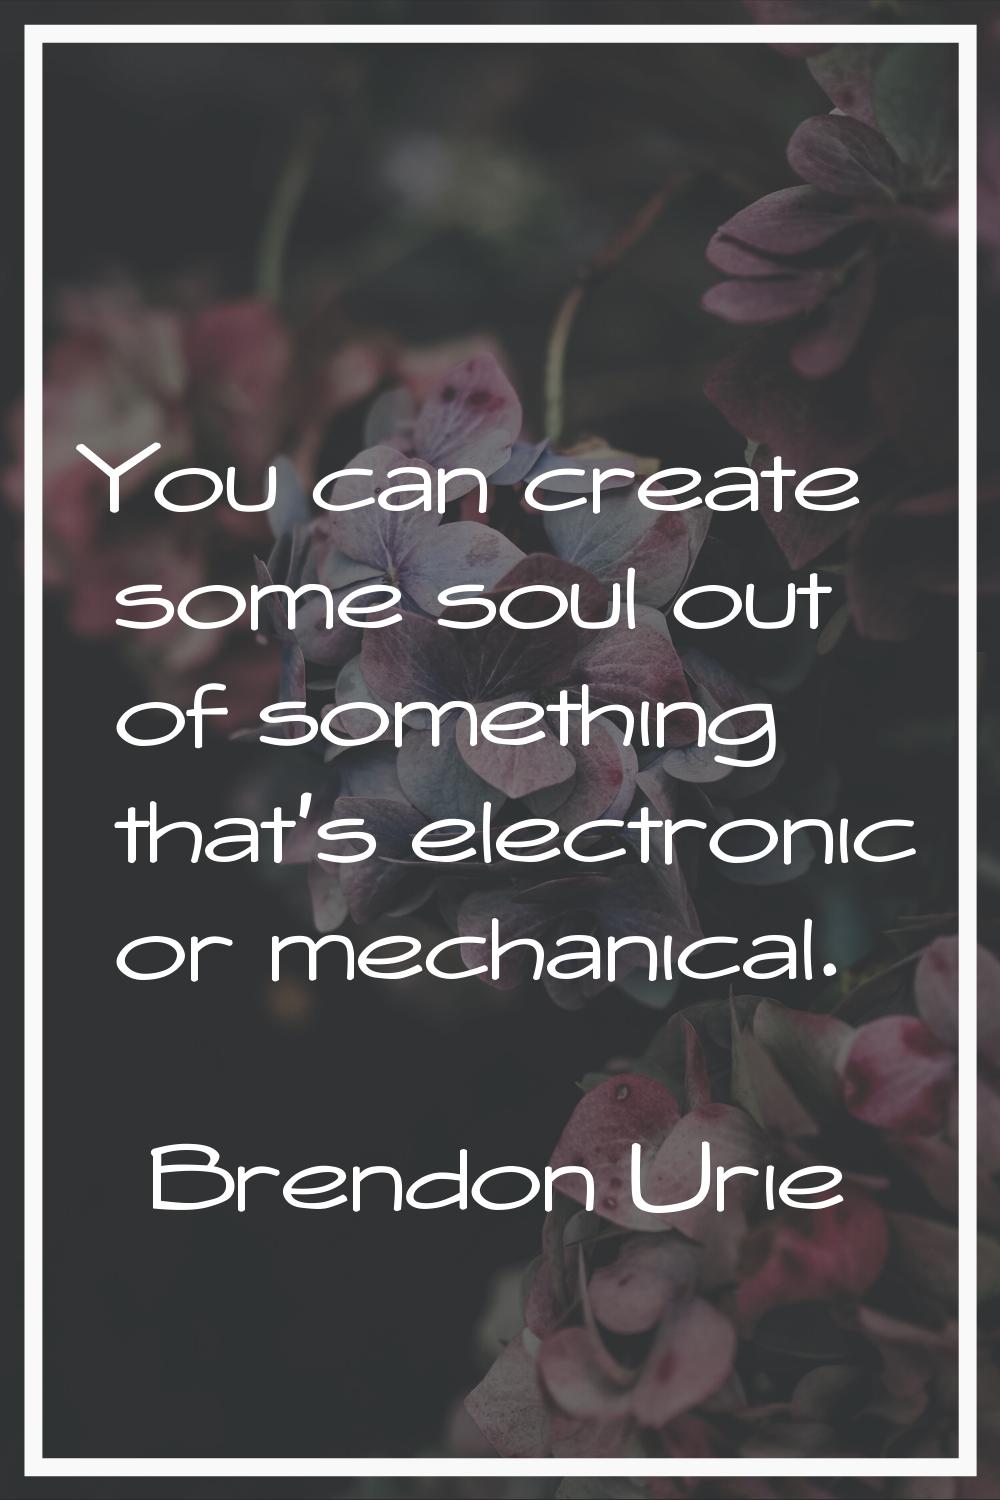 You can create some soul out of something that's electronic or mechanical.